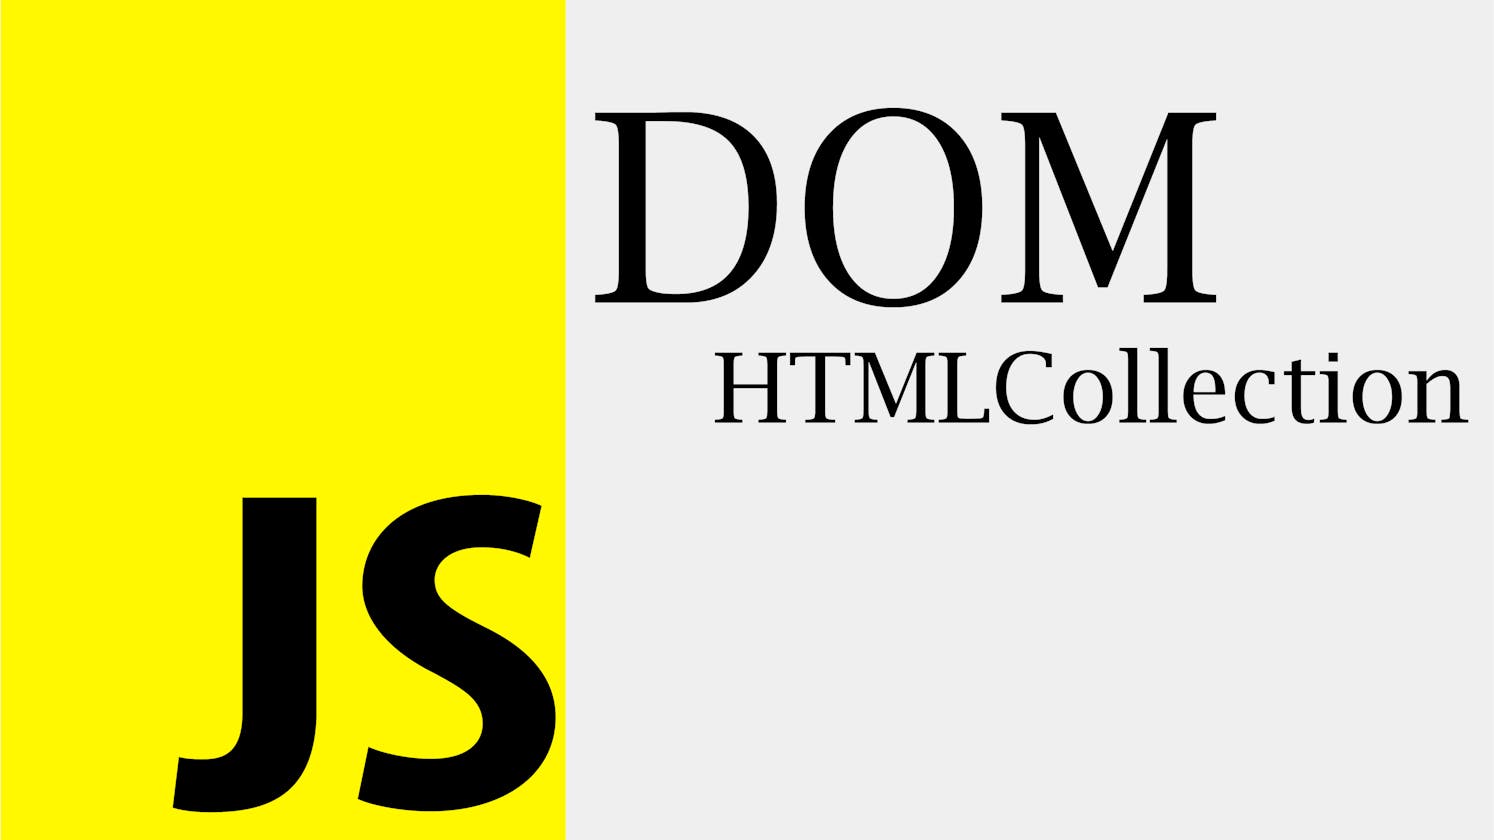 What is  HTMLCollection in JavaScript